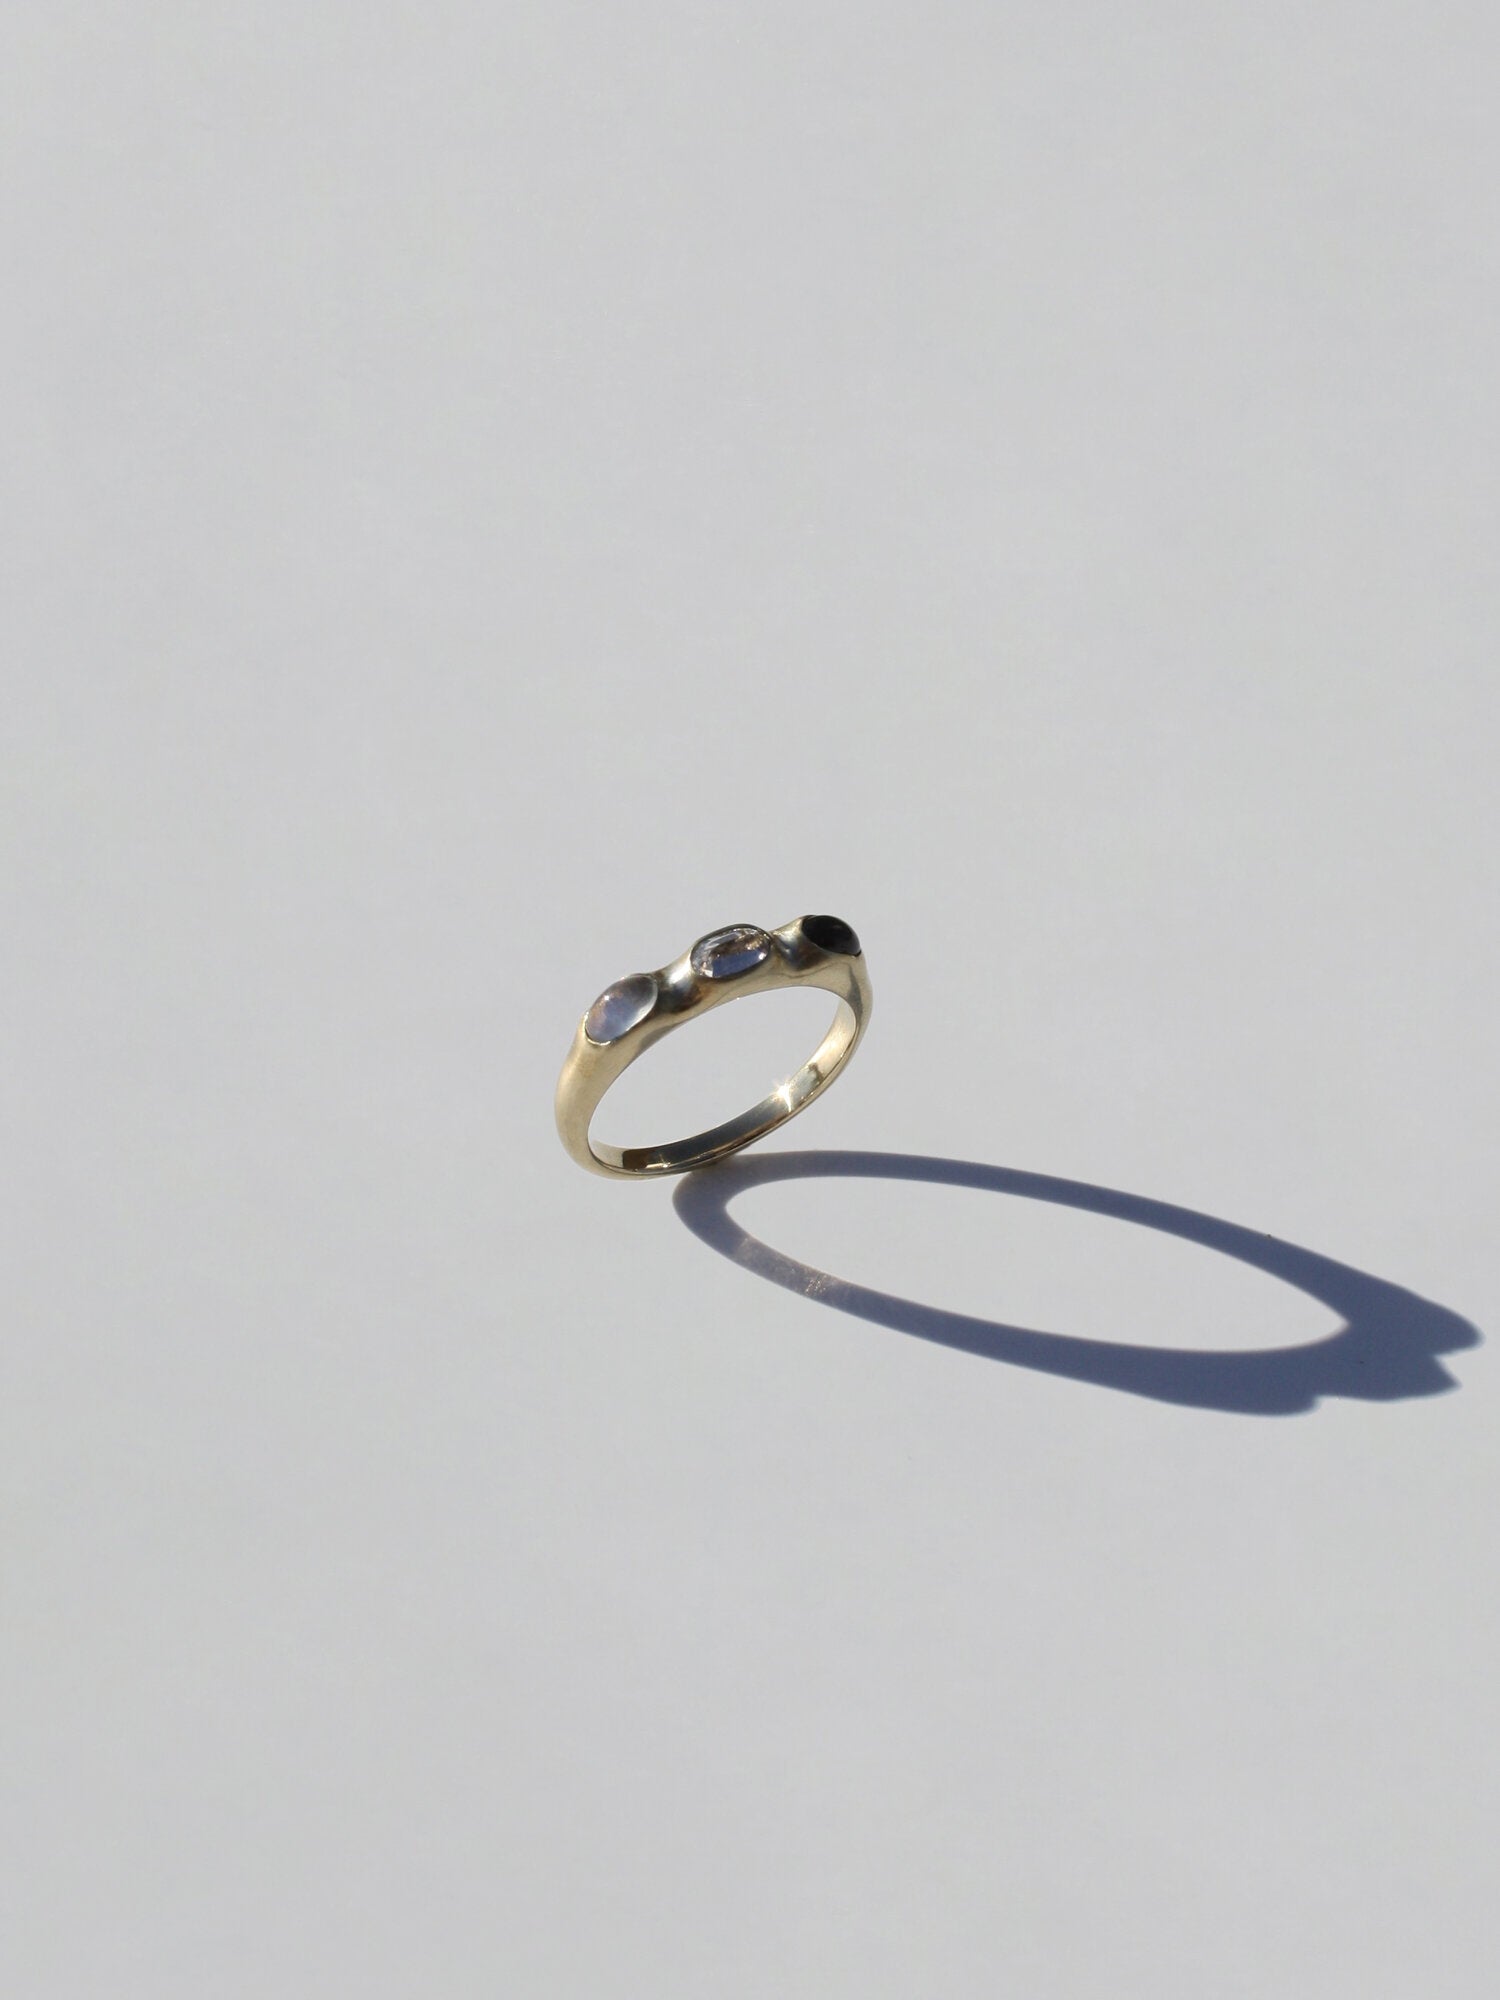 Cyril Relic Ring